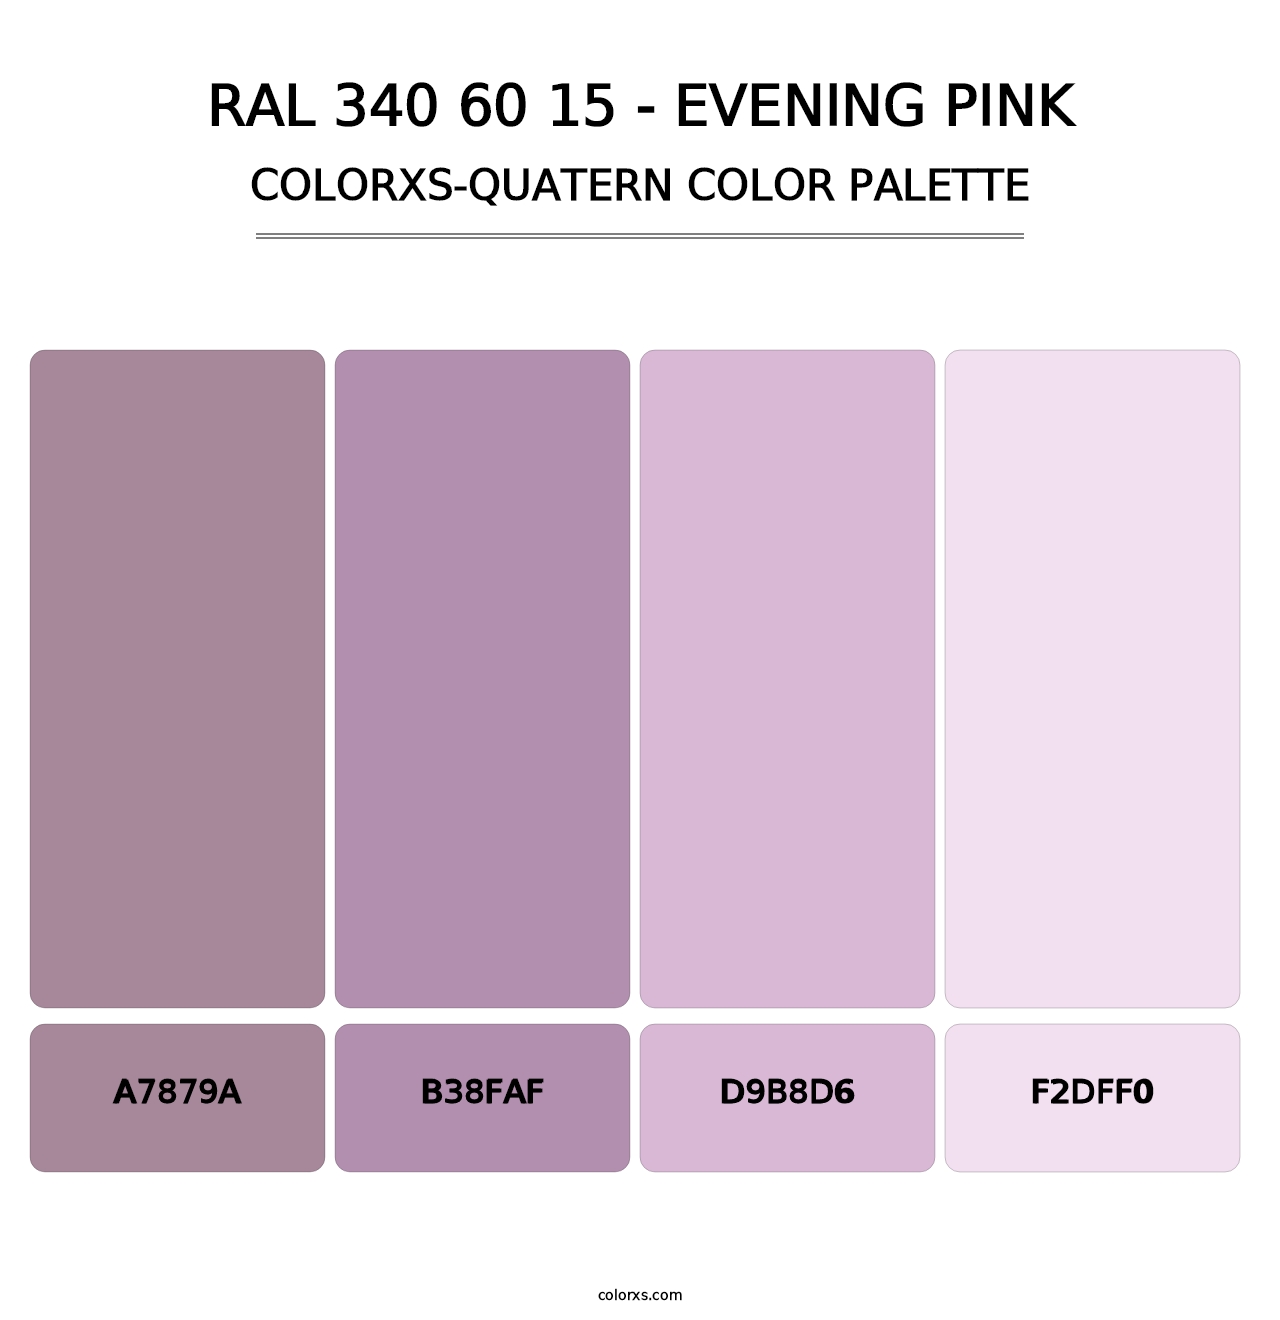 RAL 340 60 15 - Evening Pink - Colorxs Quatern Palette